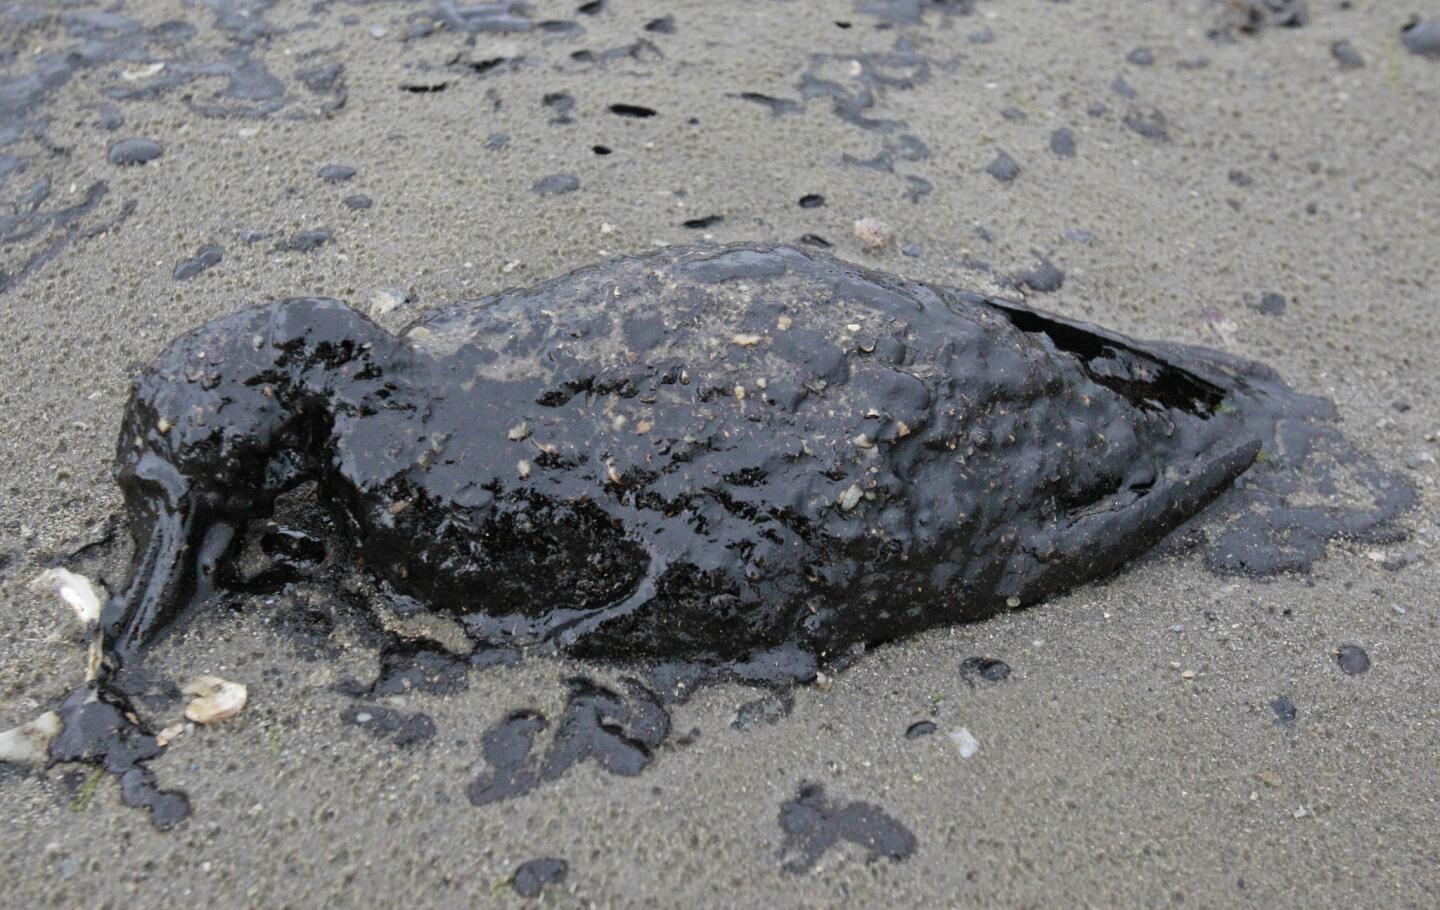 A dead oil-covered bird on the shore area on the eastern end of Galveston near the ship channel.